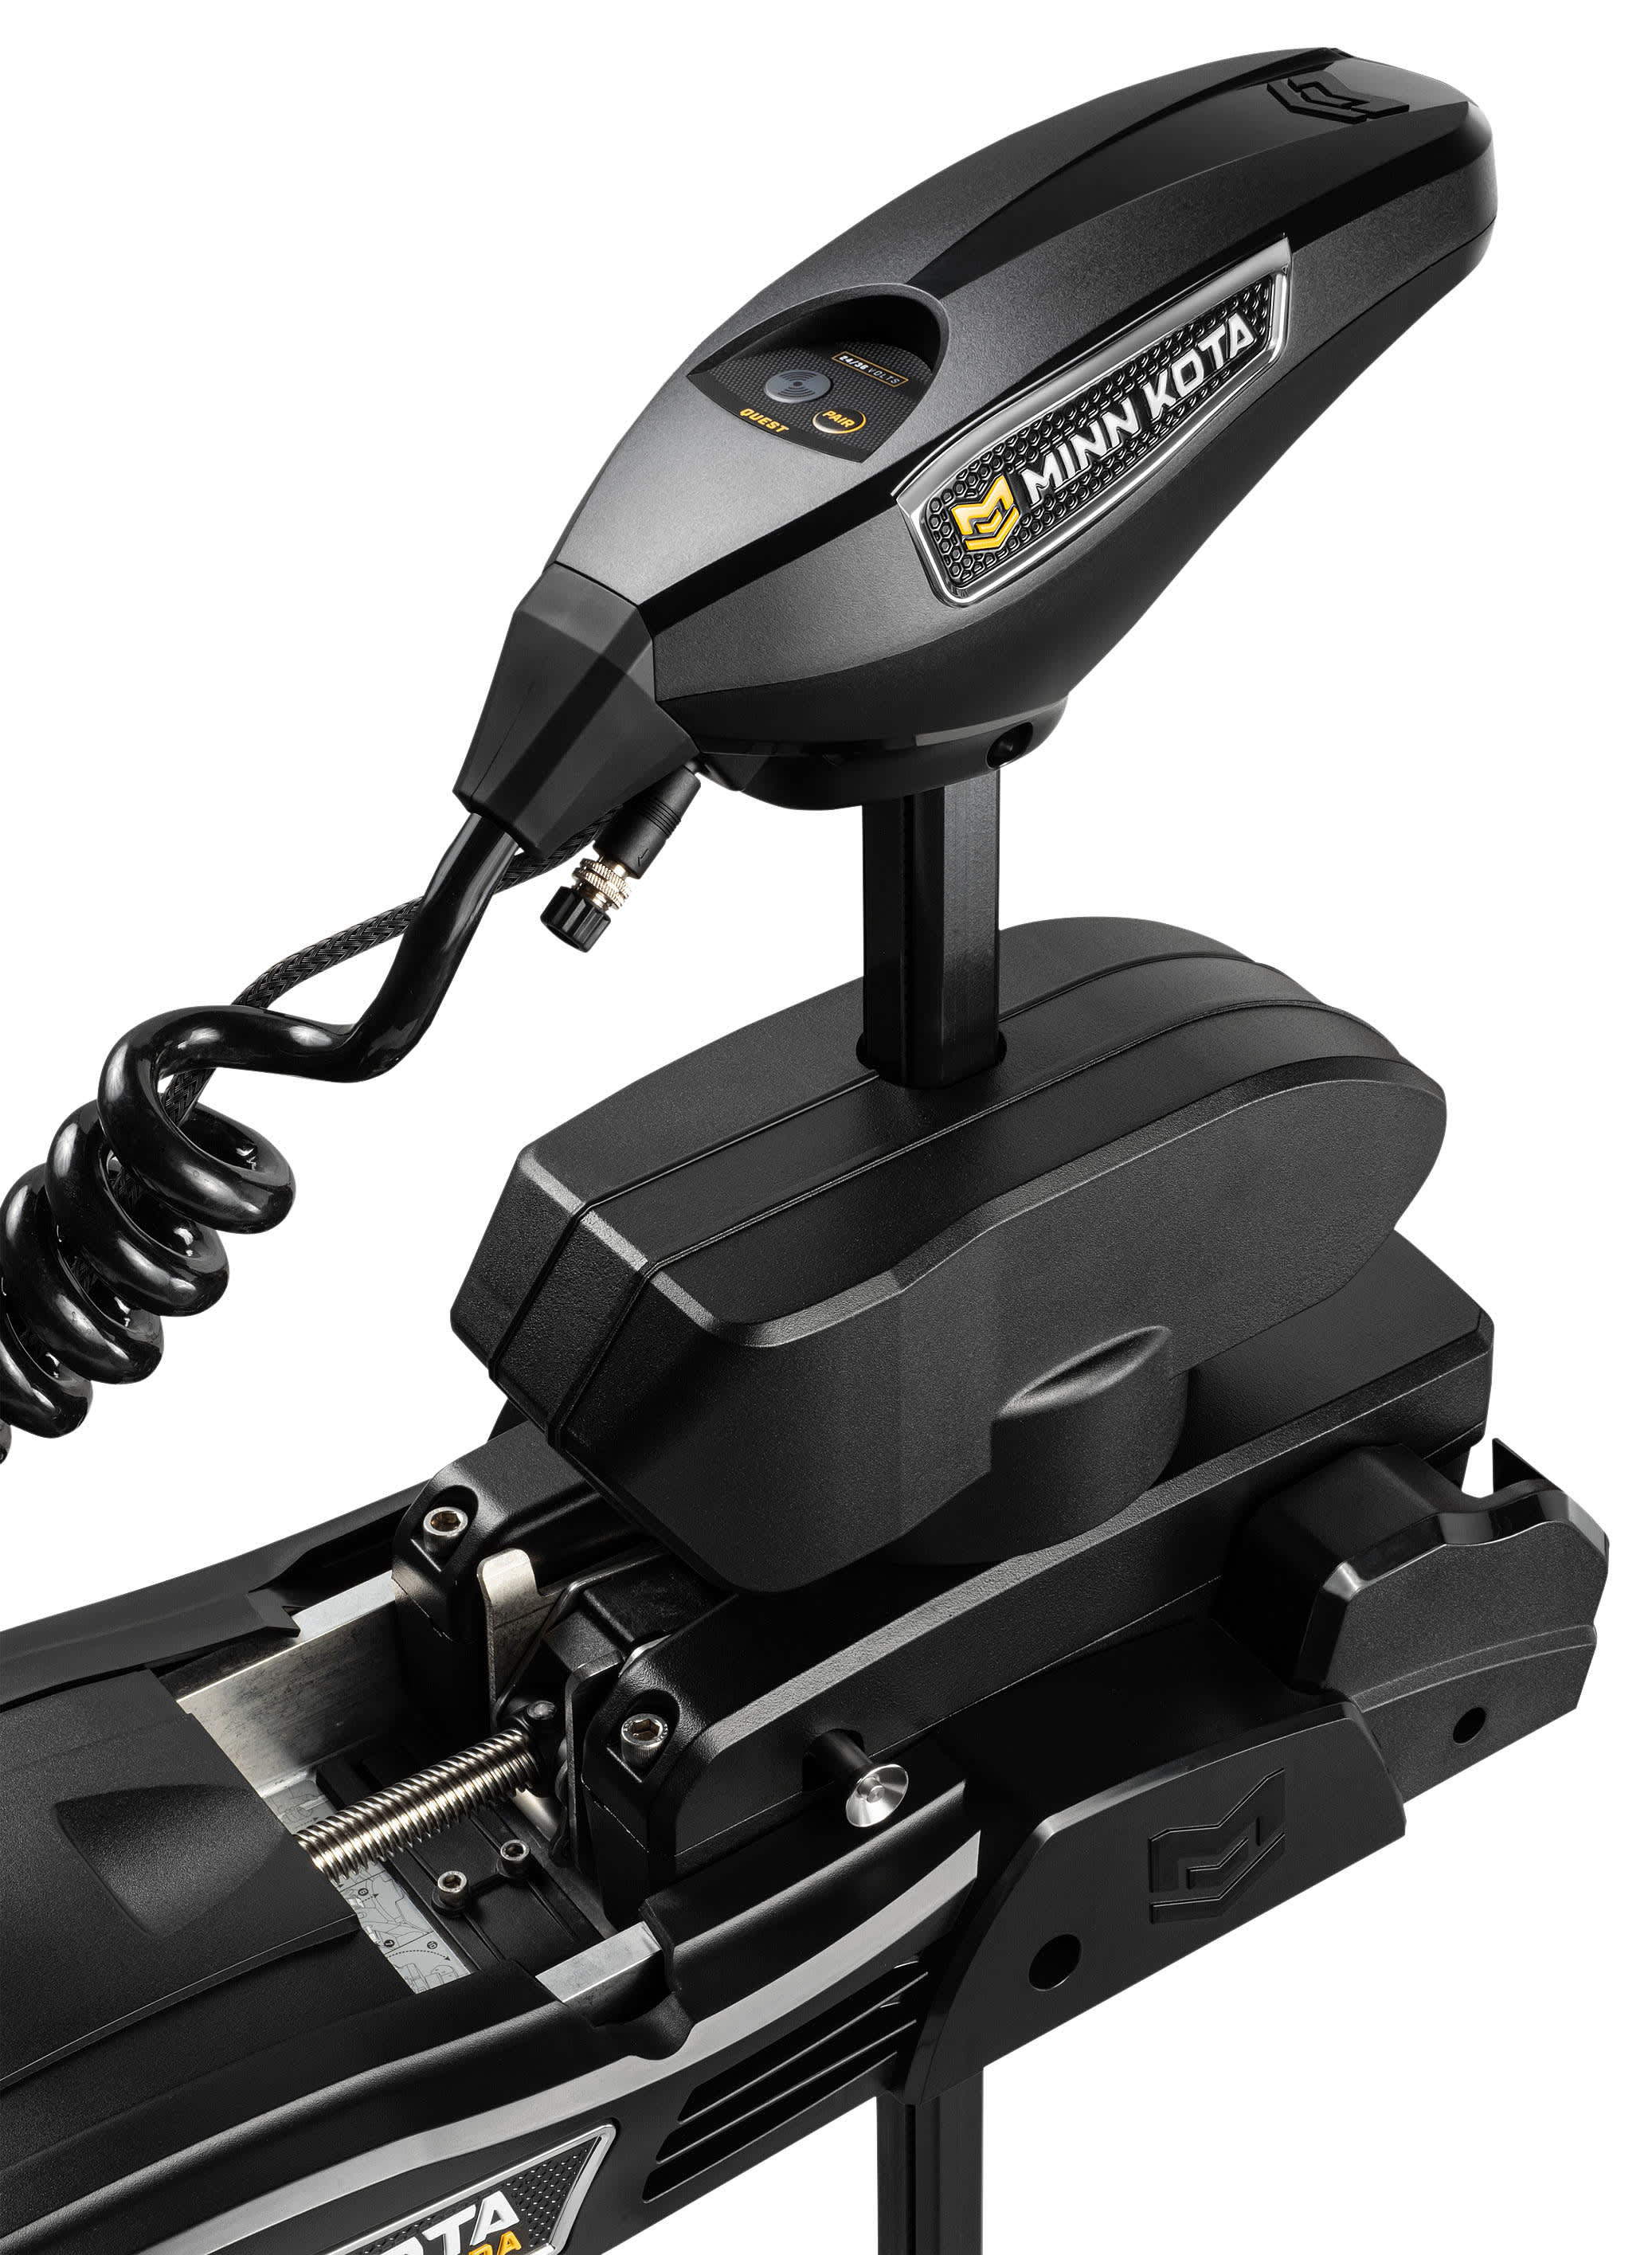 Minn Kota® Ulterra® Quest-Series Bow-Mount Trolling Motor with Dual Spectrum CHIRP, Foot Pedal and Wireless Remote - 60'' Shaft